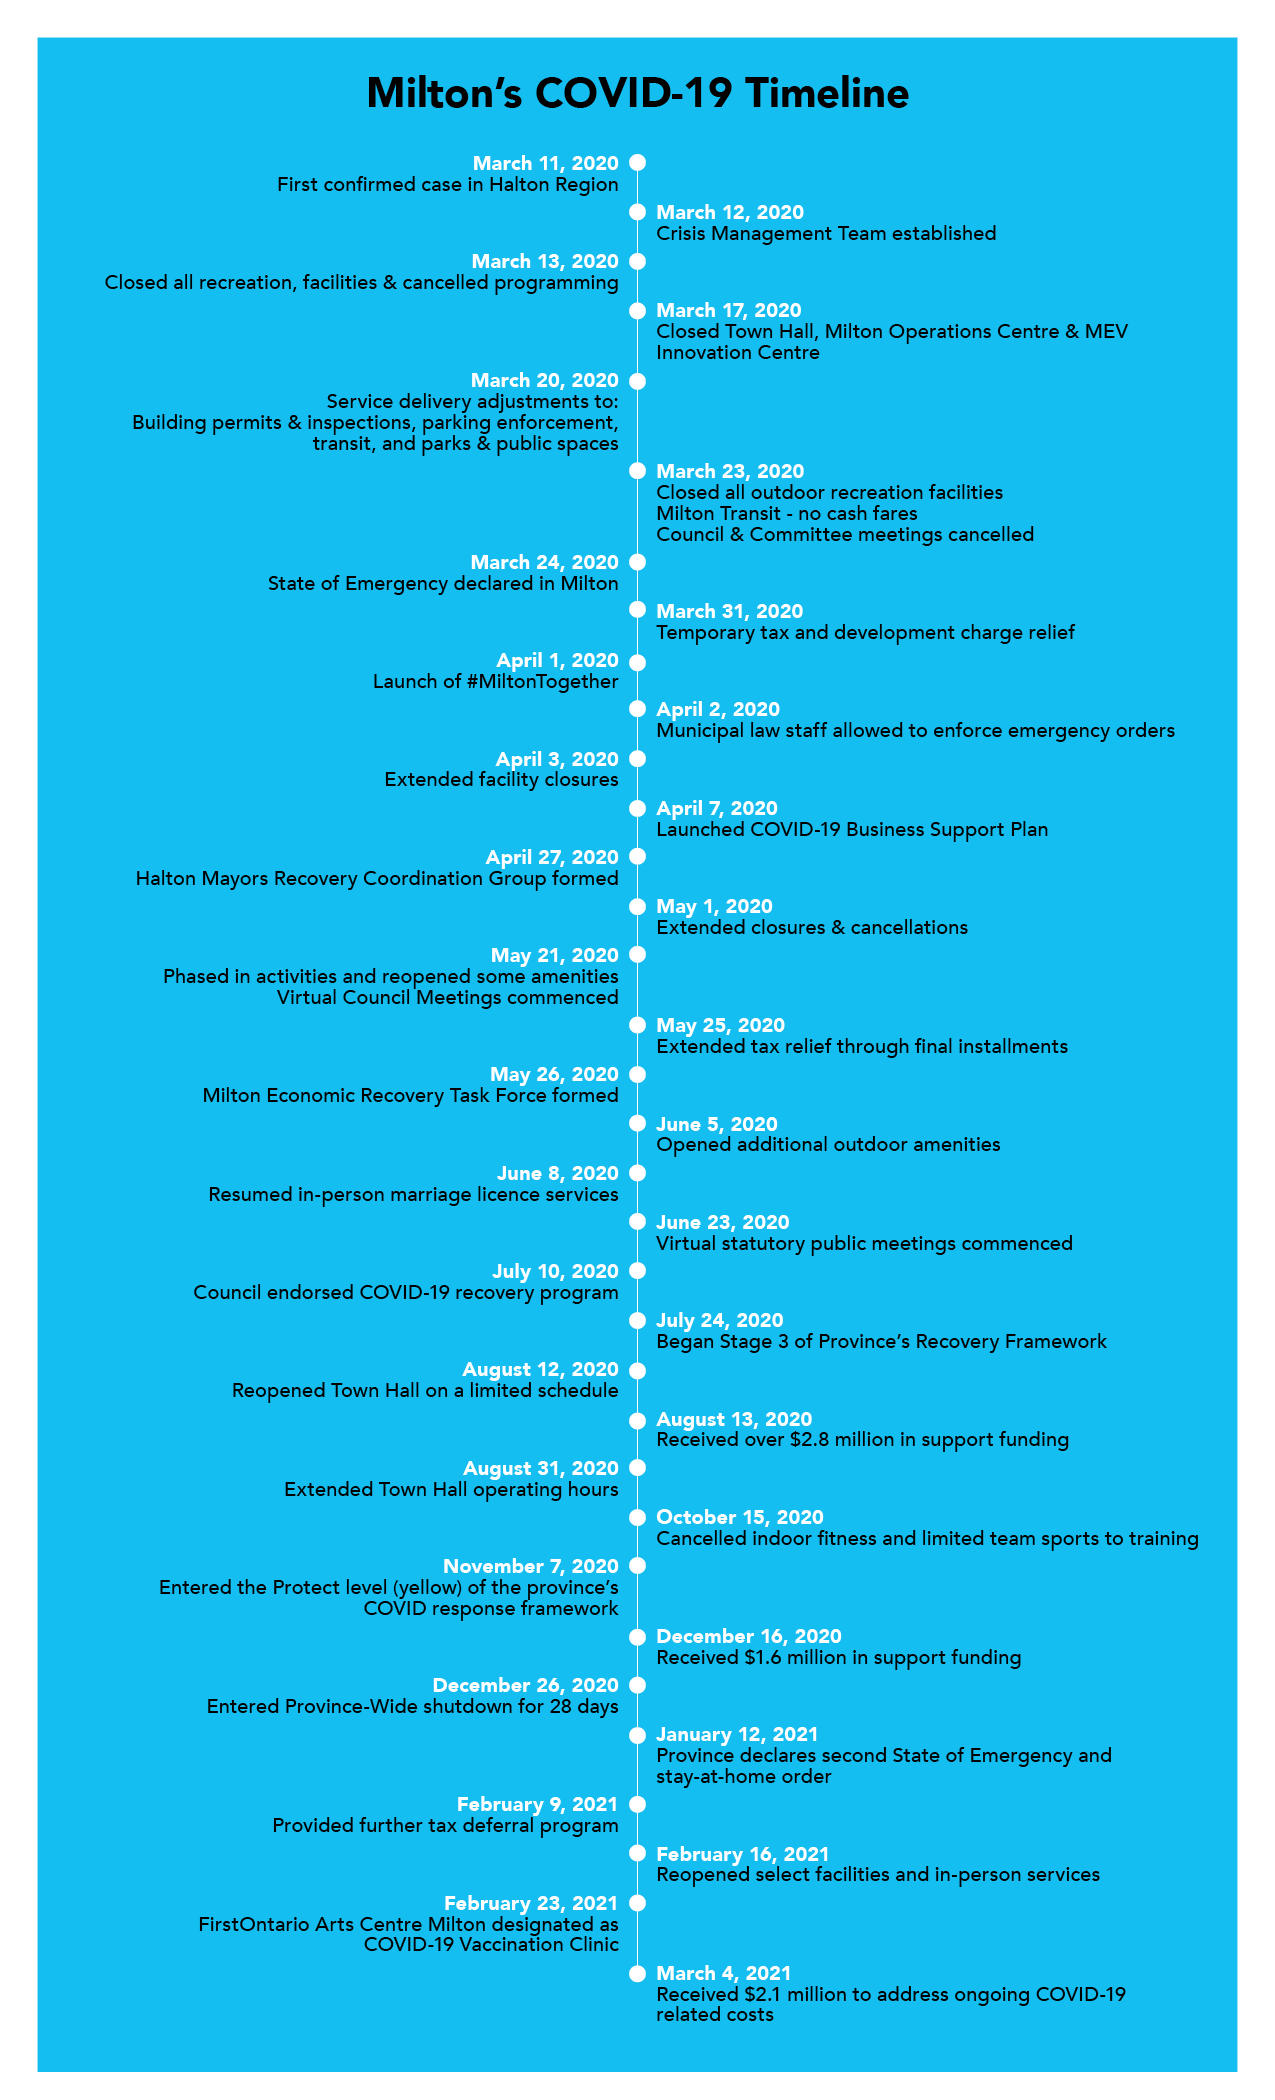 Visual timeline of Milton's response to COVID-19